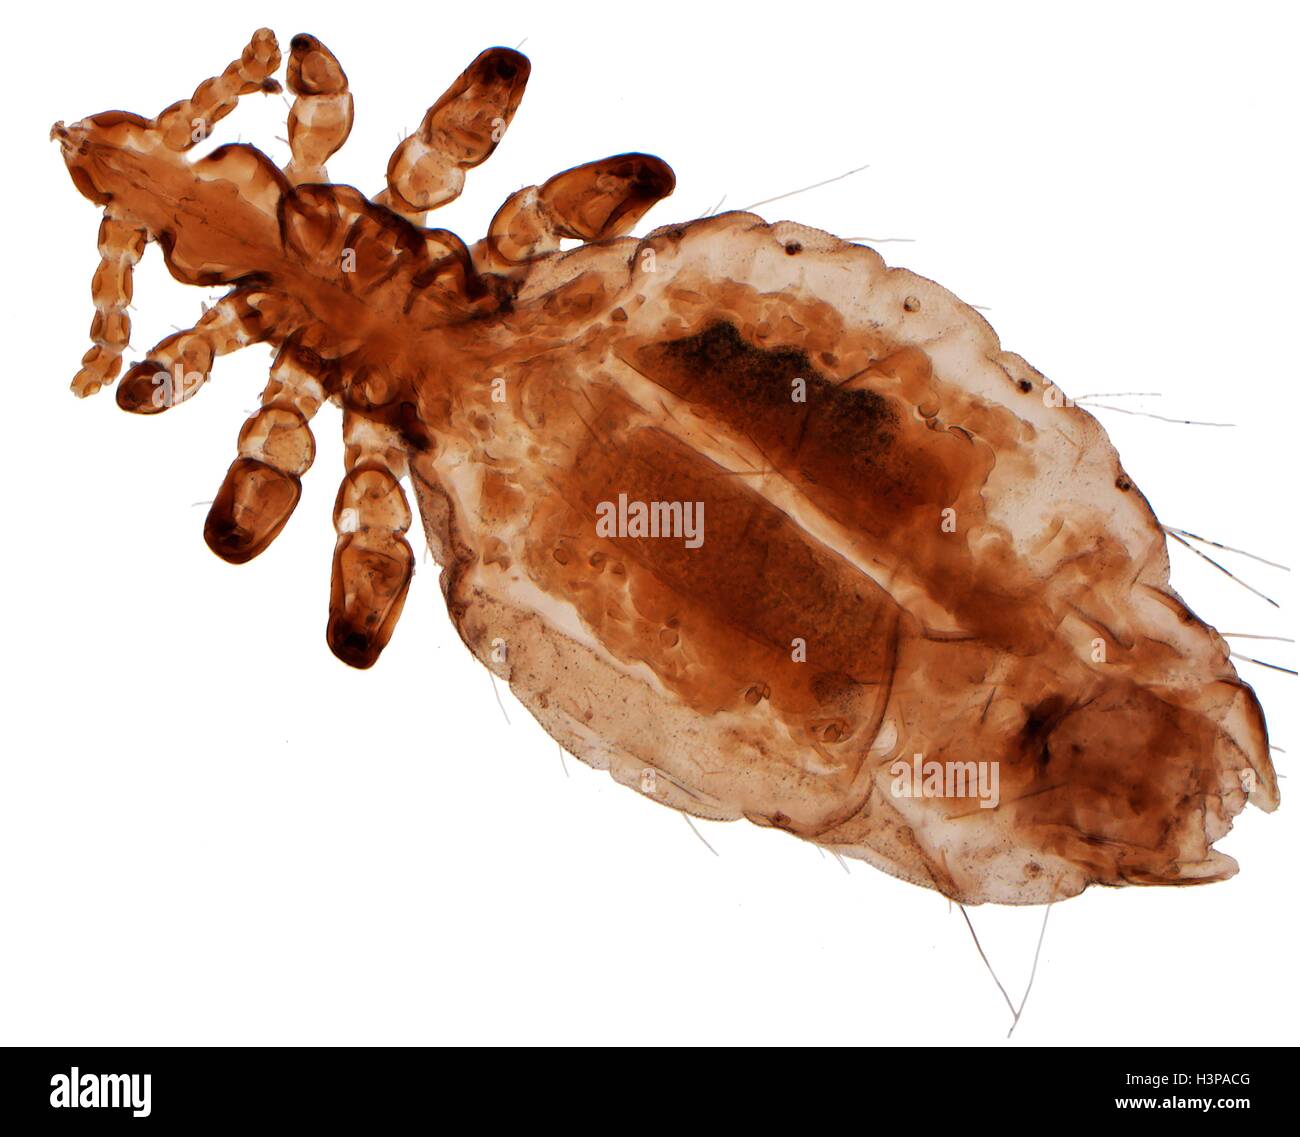 Human head louse, Light microraph (LM) 0f Pediculus humanus capitis. P. humanus is divided into two subspecies; the head louse P. humanus capitis and the body louse P. humanus corporis. The body louse lives in clothing and only moves onto the skin to eat, whereas the head louse is restricted to the hair of the head. Despite this difference in habitat, the two lice differ only slightly in shape and are capable of interbreeding. Head lice glue their eggs (nits) to hairs, while the body louse mainly uses the folds of the seams in clothing. Magnification: x25 when printed 10cm wide. Stock Photo